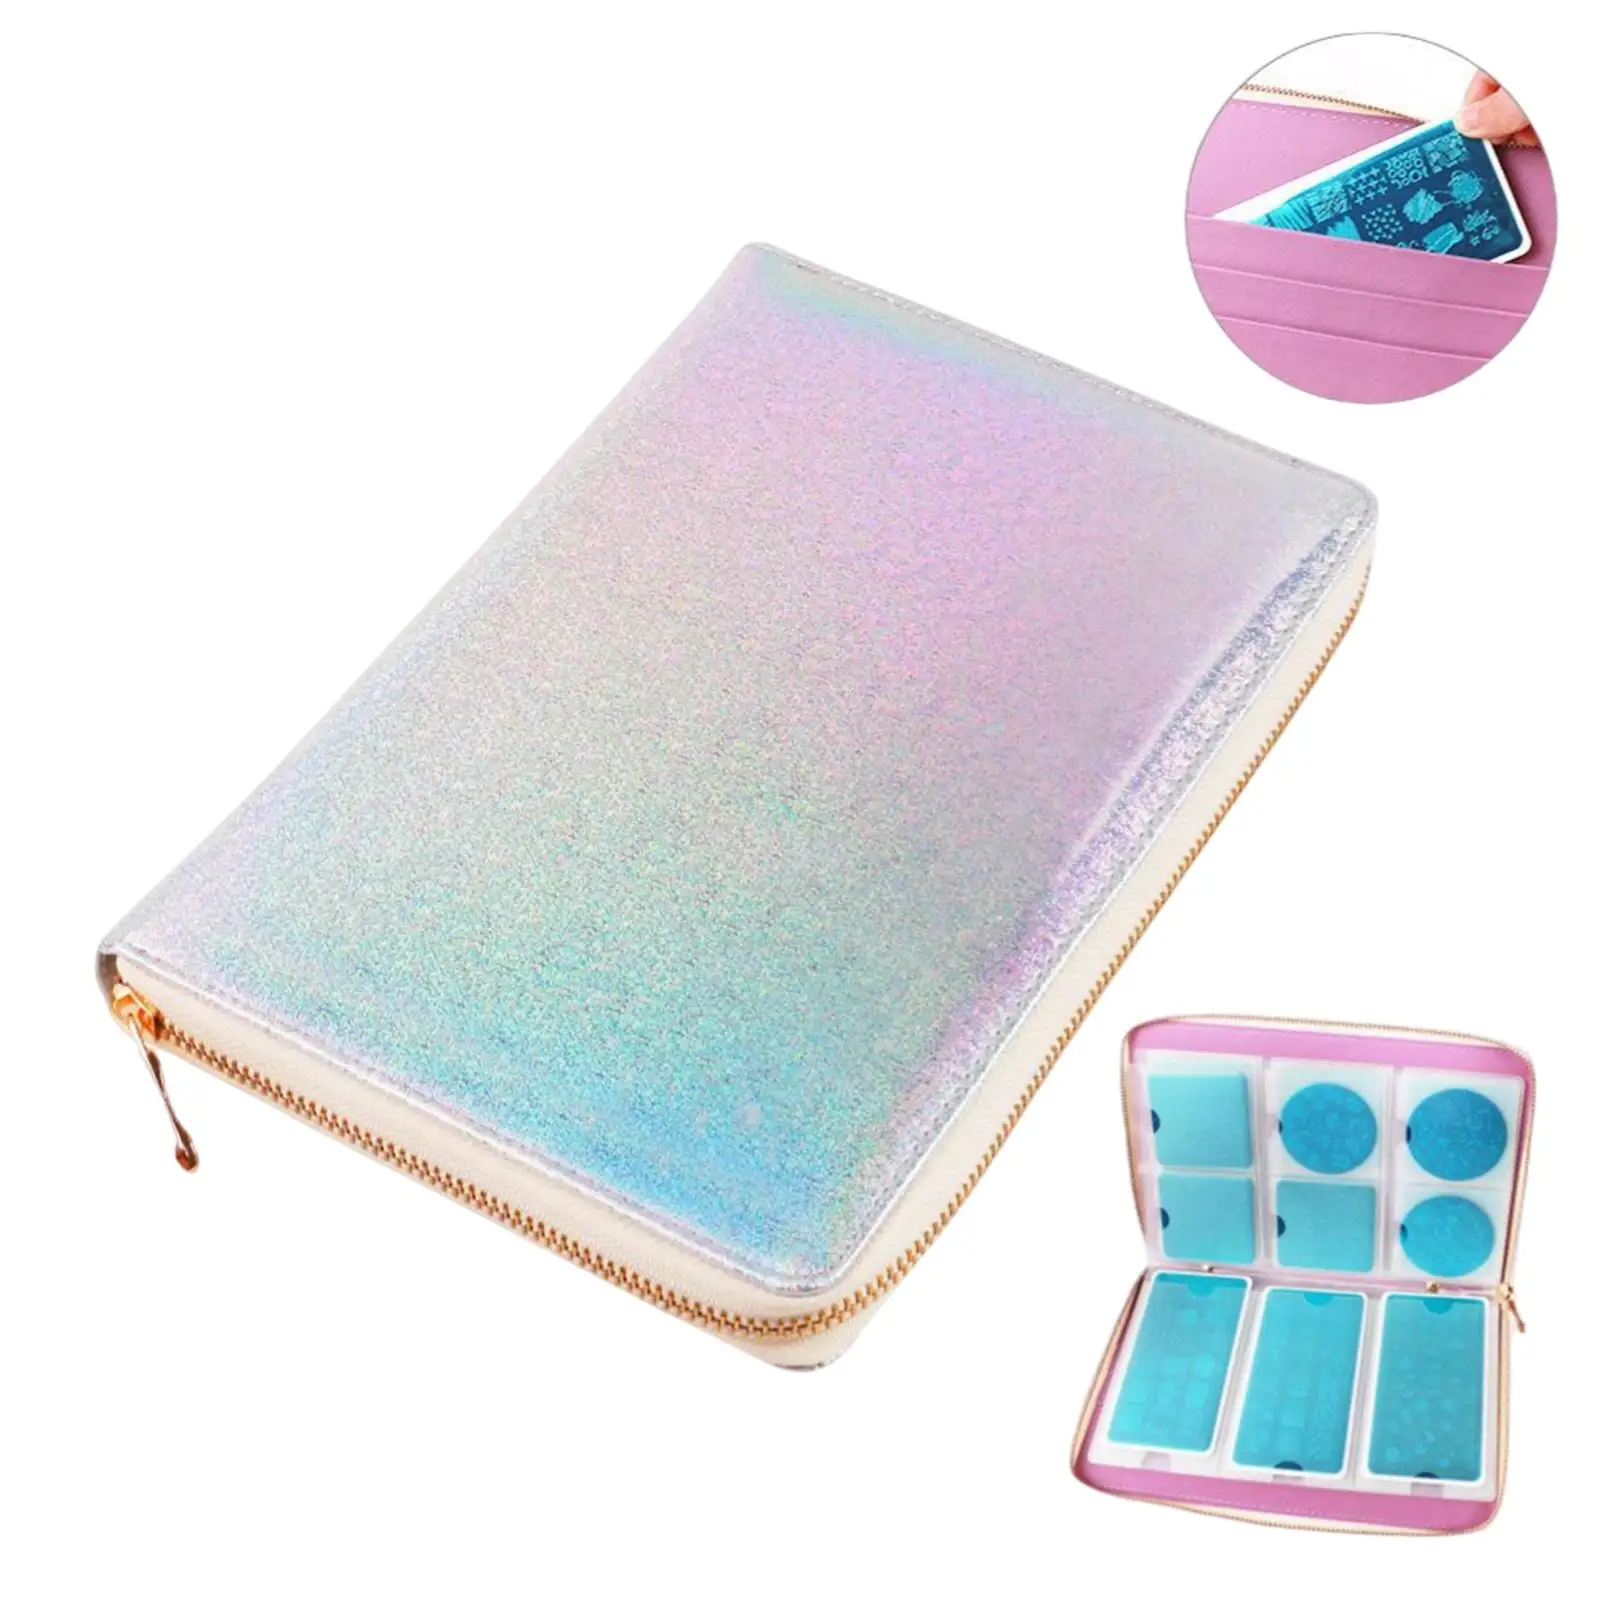 Nail Template Case Snap Close DIY Tool, Organizer for Nail Art Plates Accessories